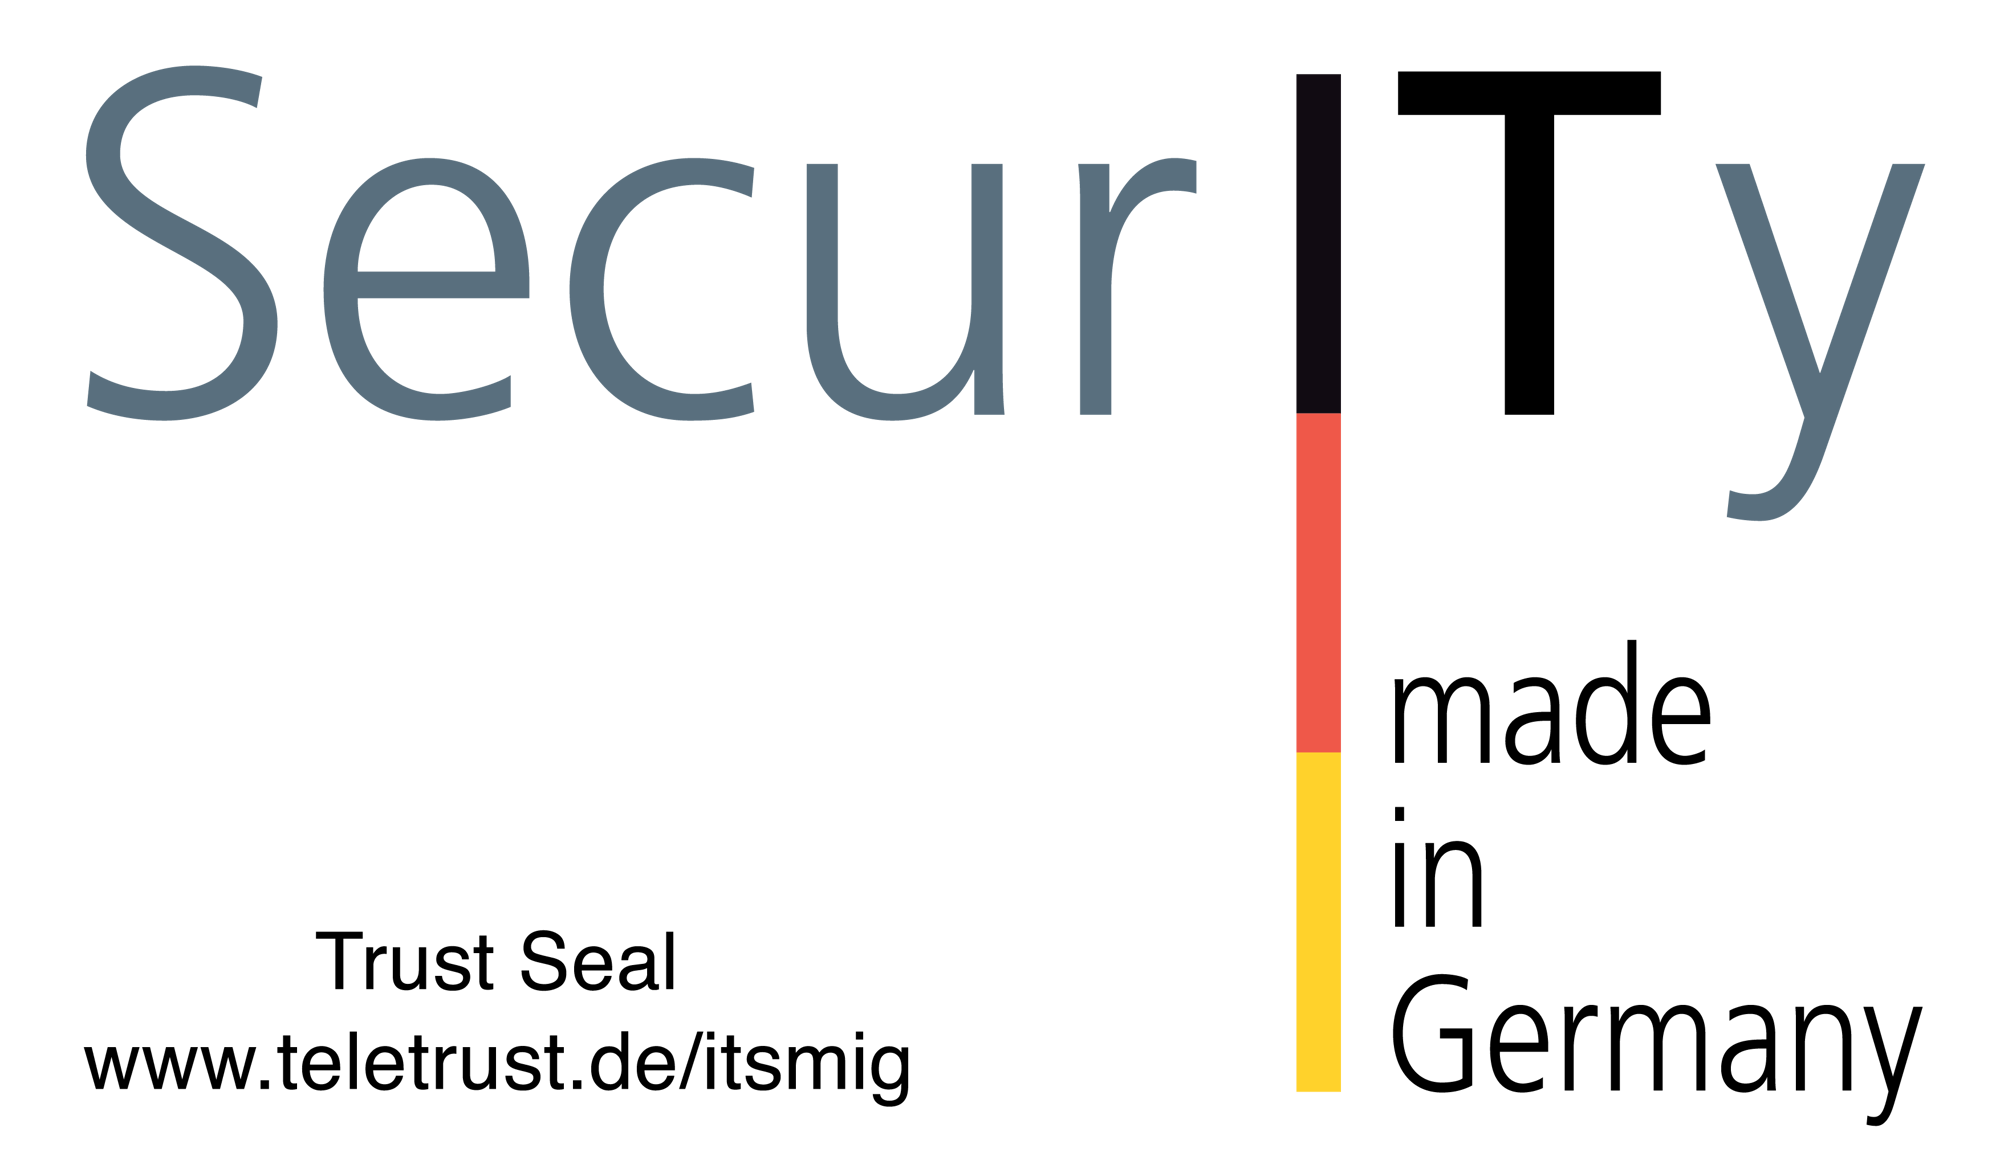 IT Security made in Germany_TeleTrusT Seal-01